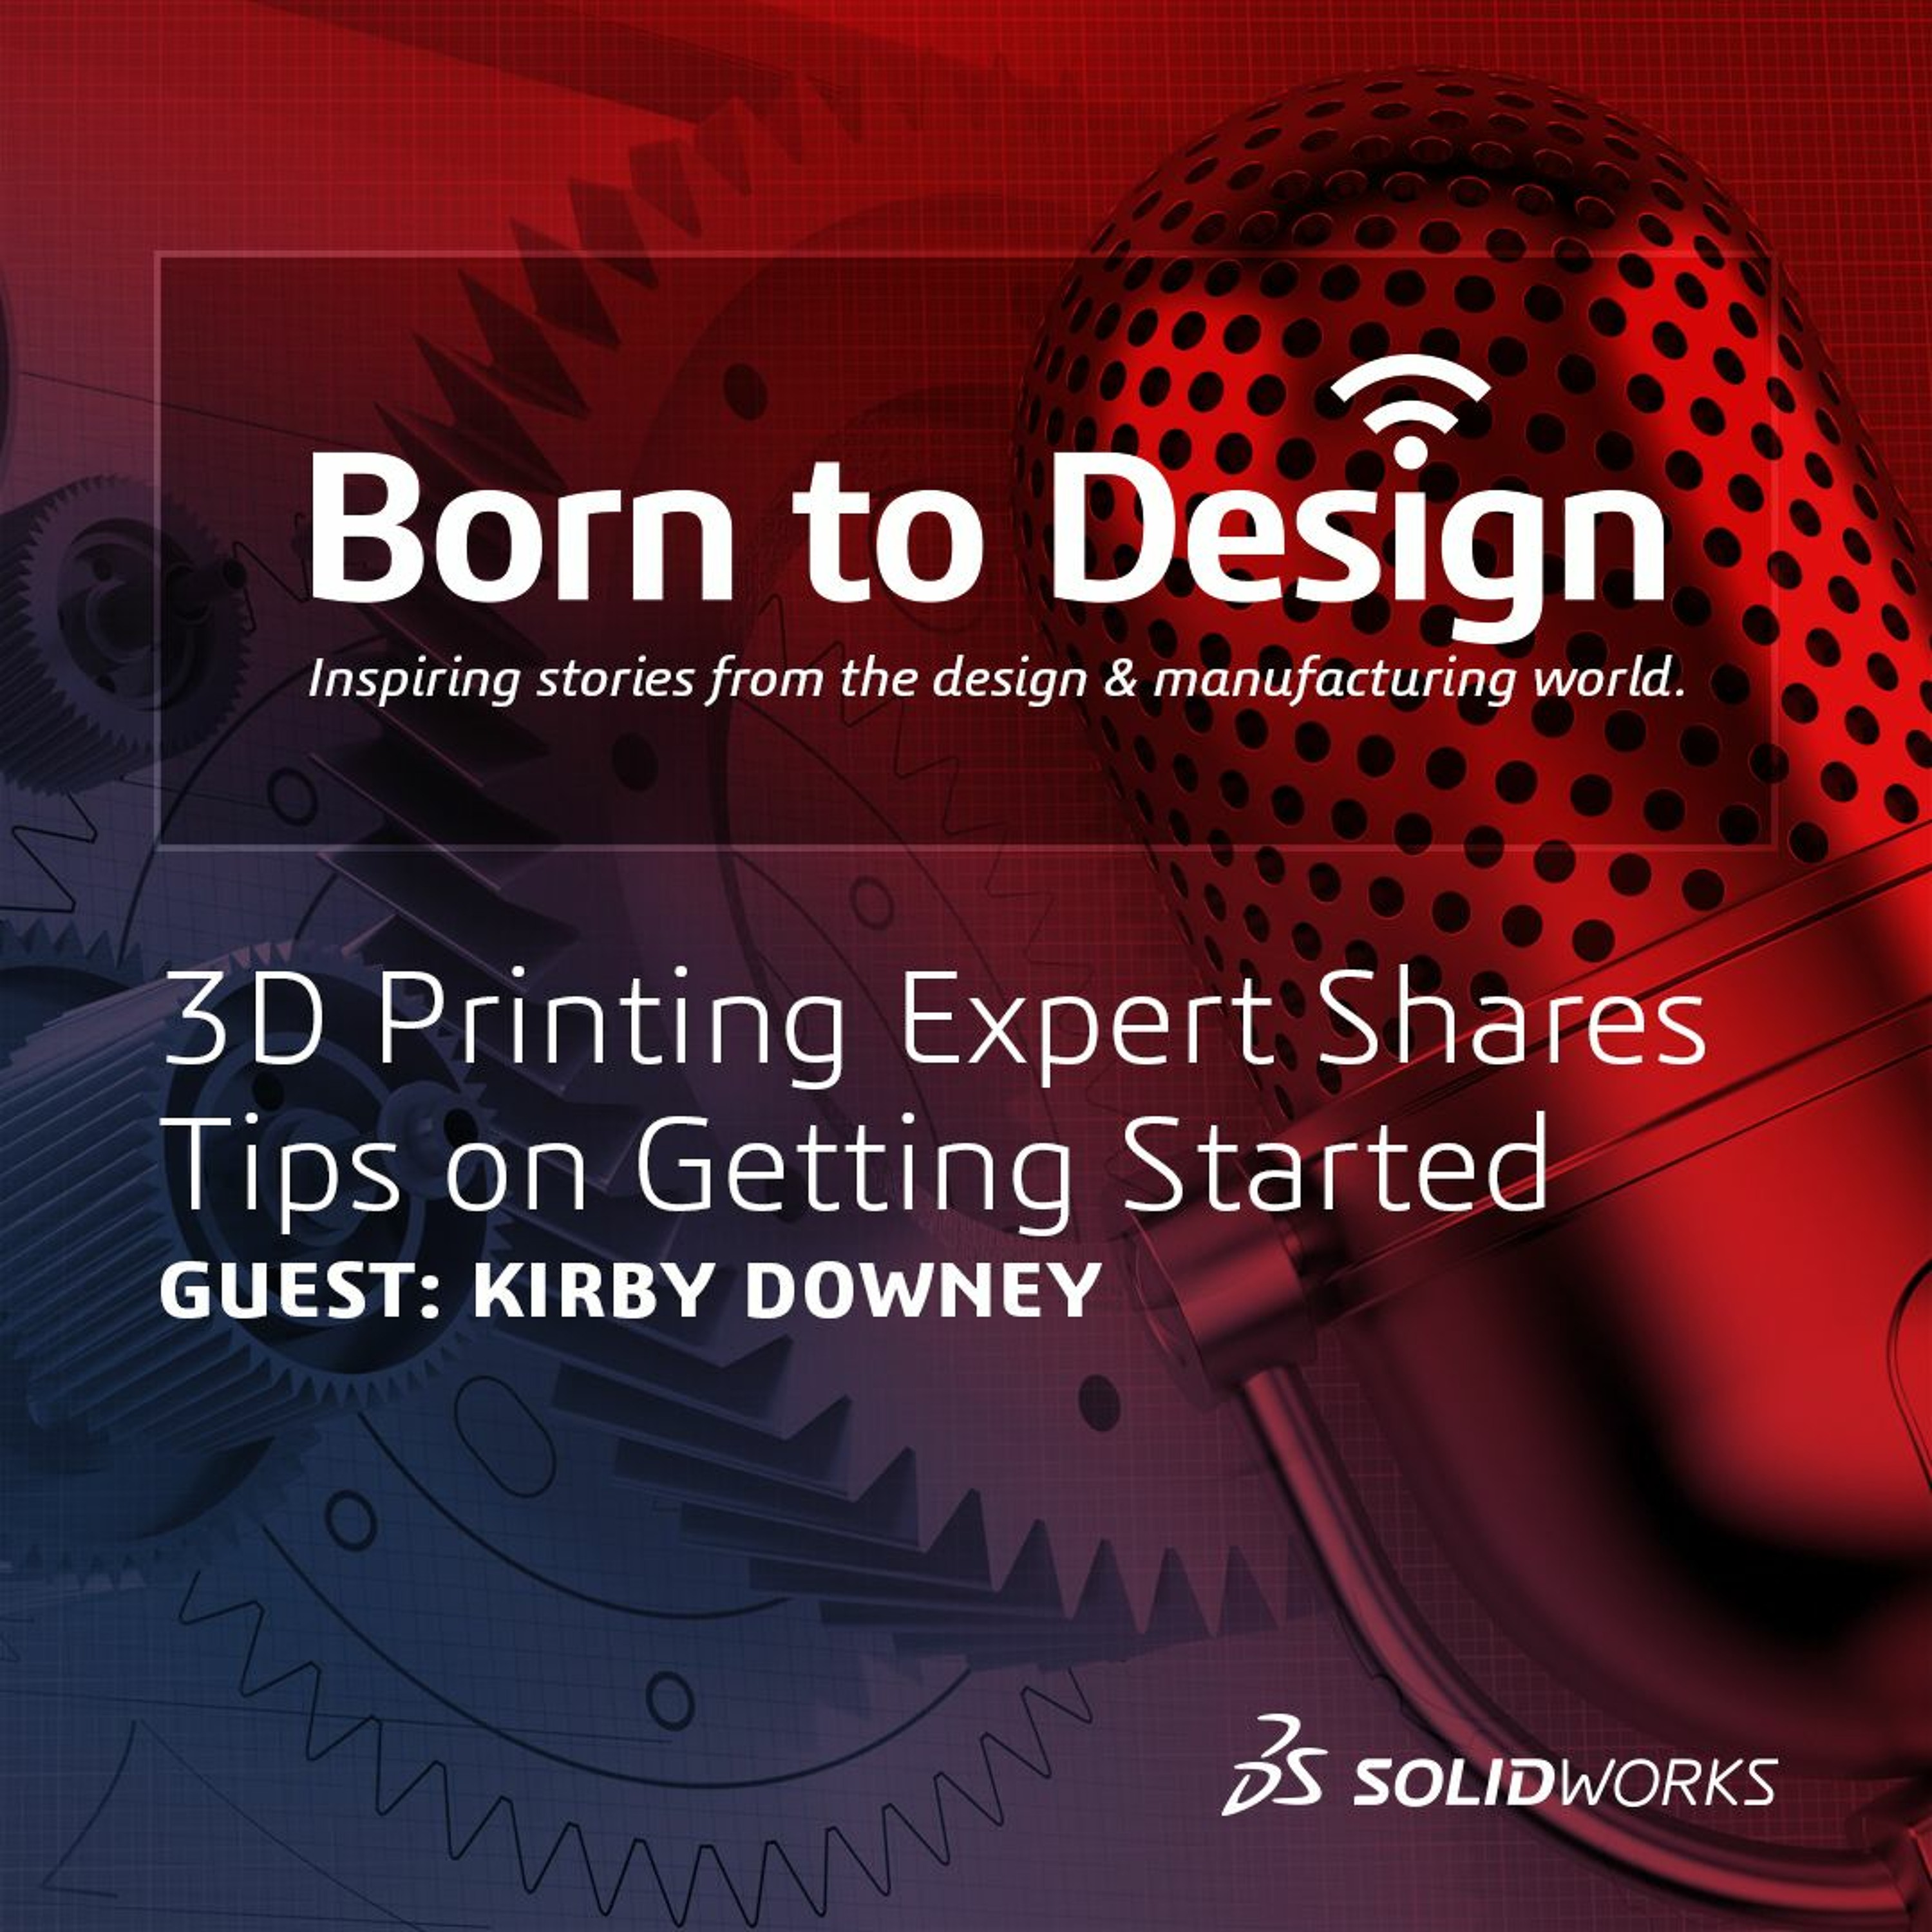 42- 3D Printing Expert Shares Tips on Getting Started